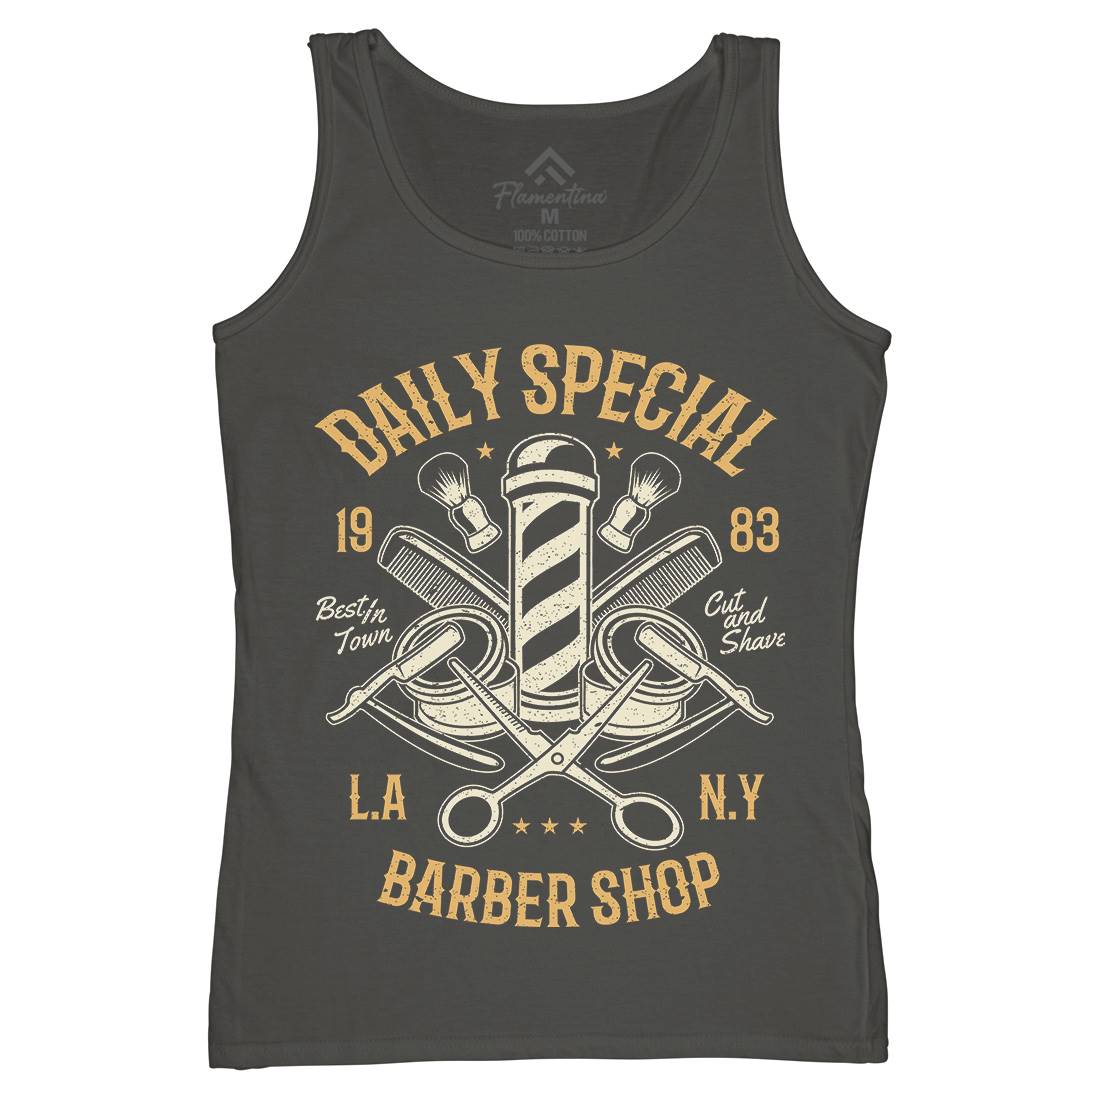 Daily Special Shop Womens Organic Tank Top Vest Barber A041